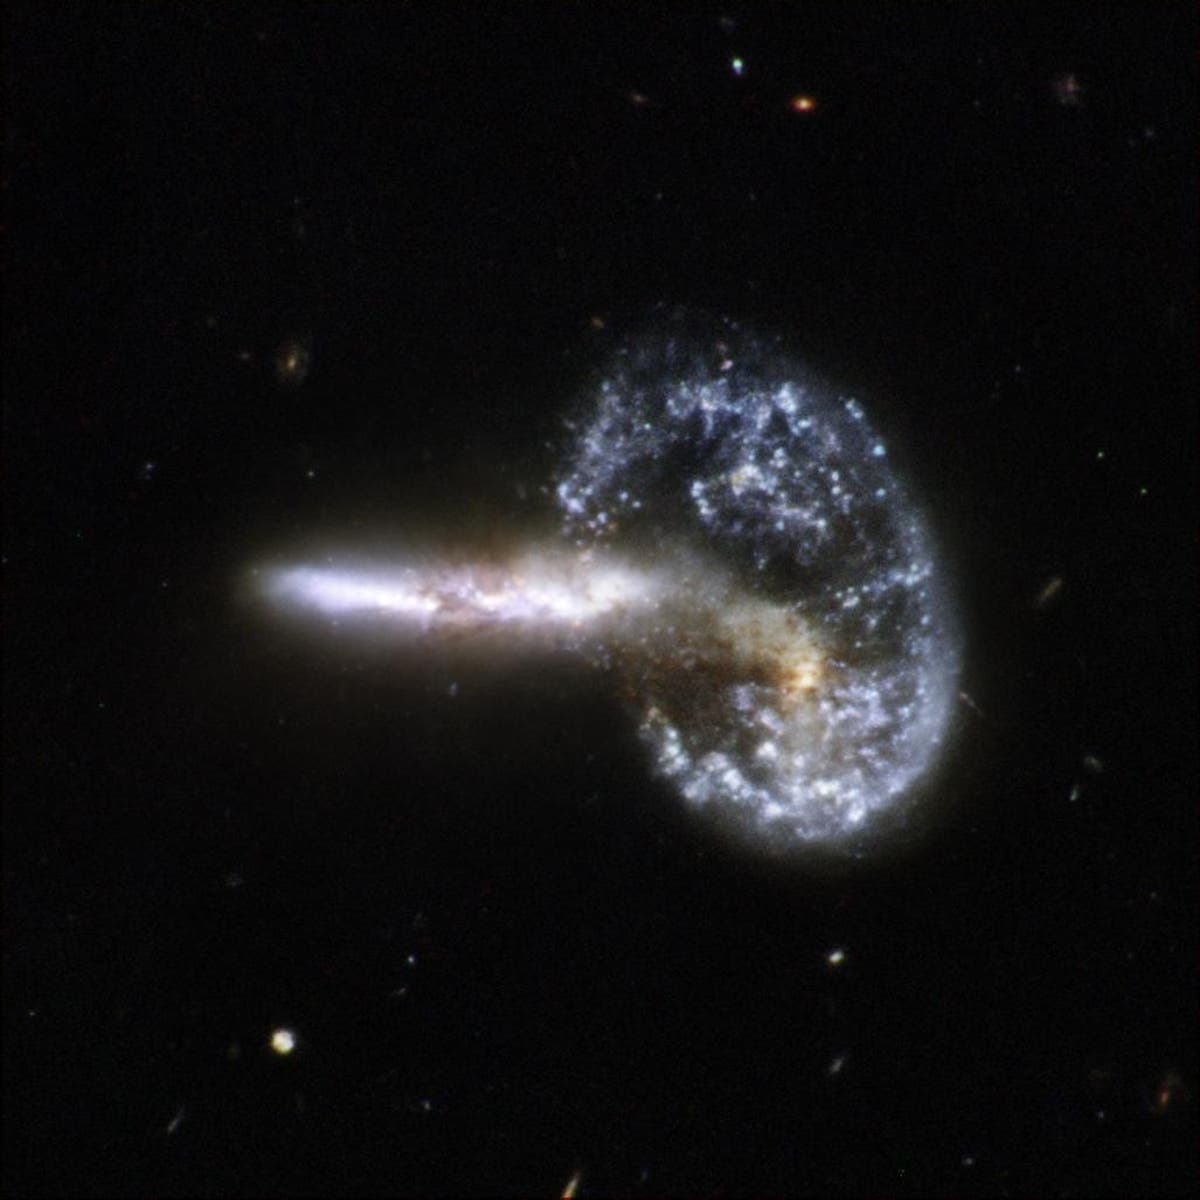 Small galaxies can lose their dark matter in confrontations with Goliath galaxies